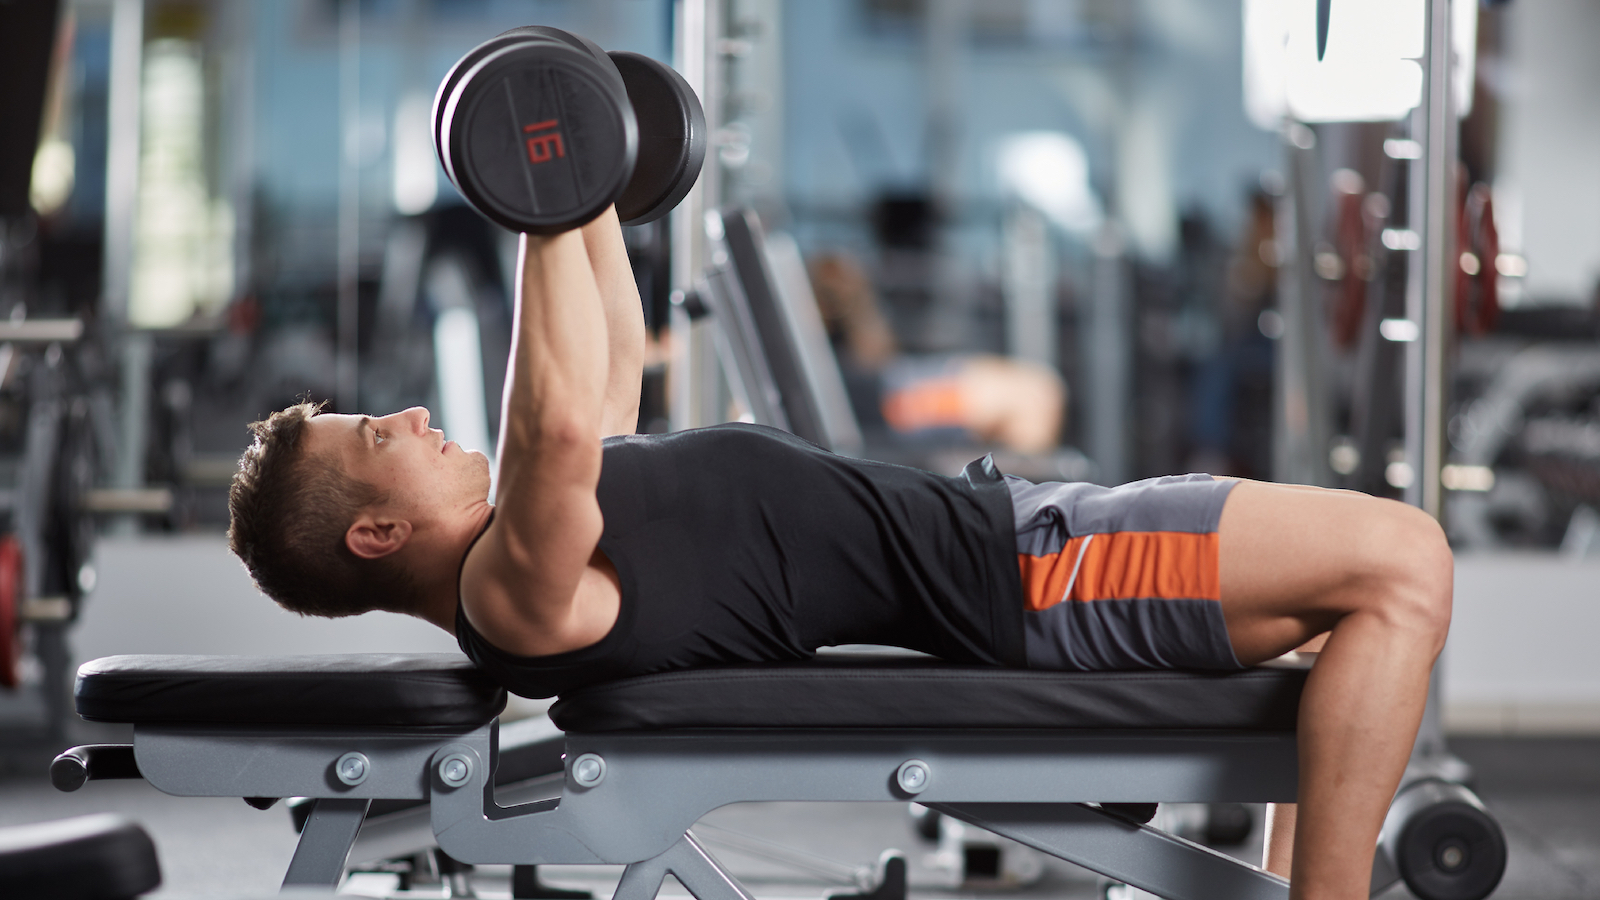 Man doing upper body exercise on a workout bench.